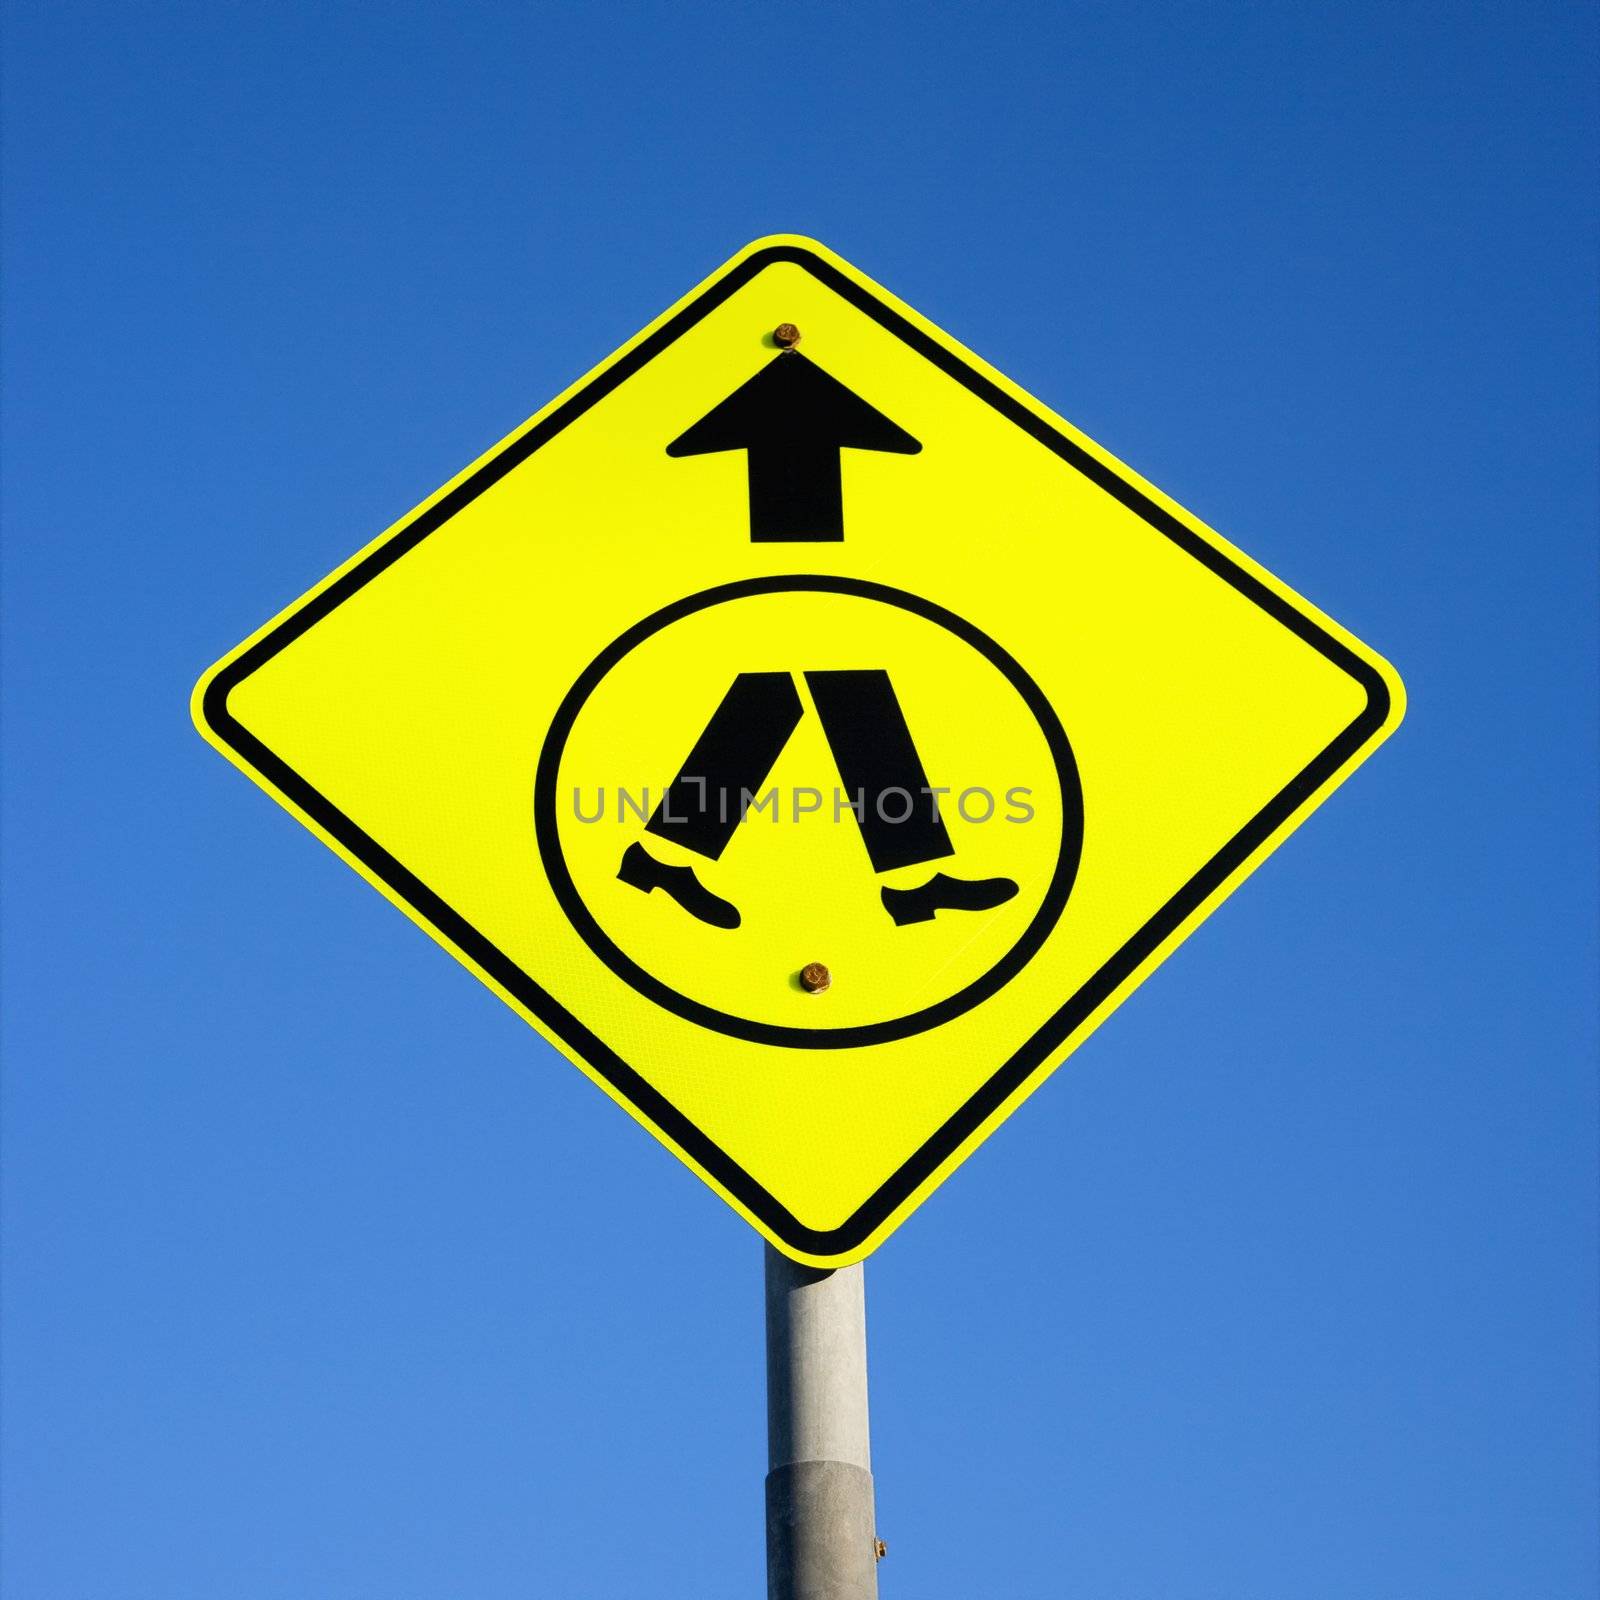 Pedestrian crossing sign. by iofoto